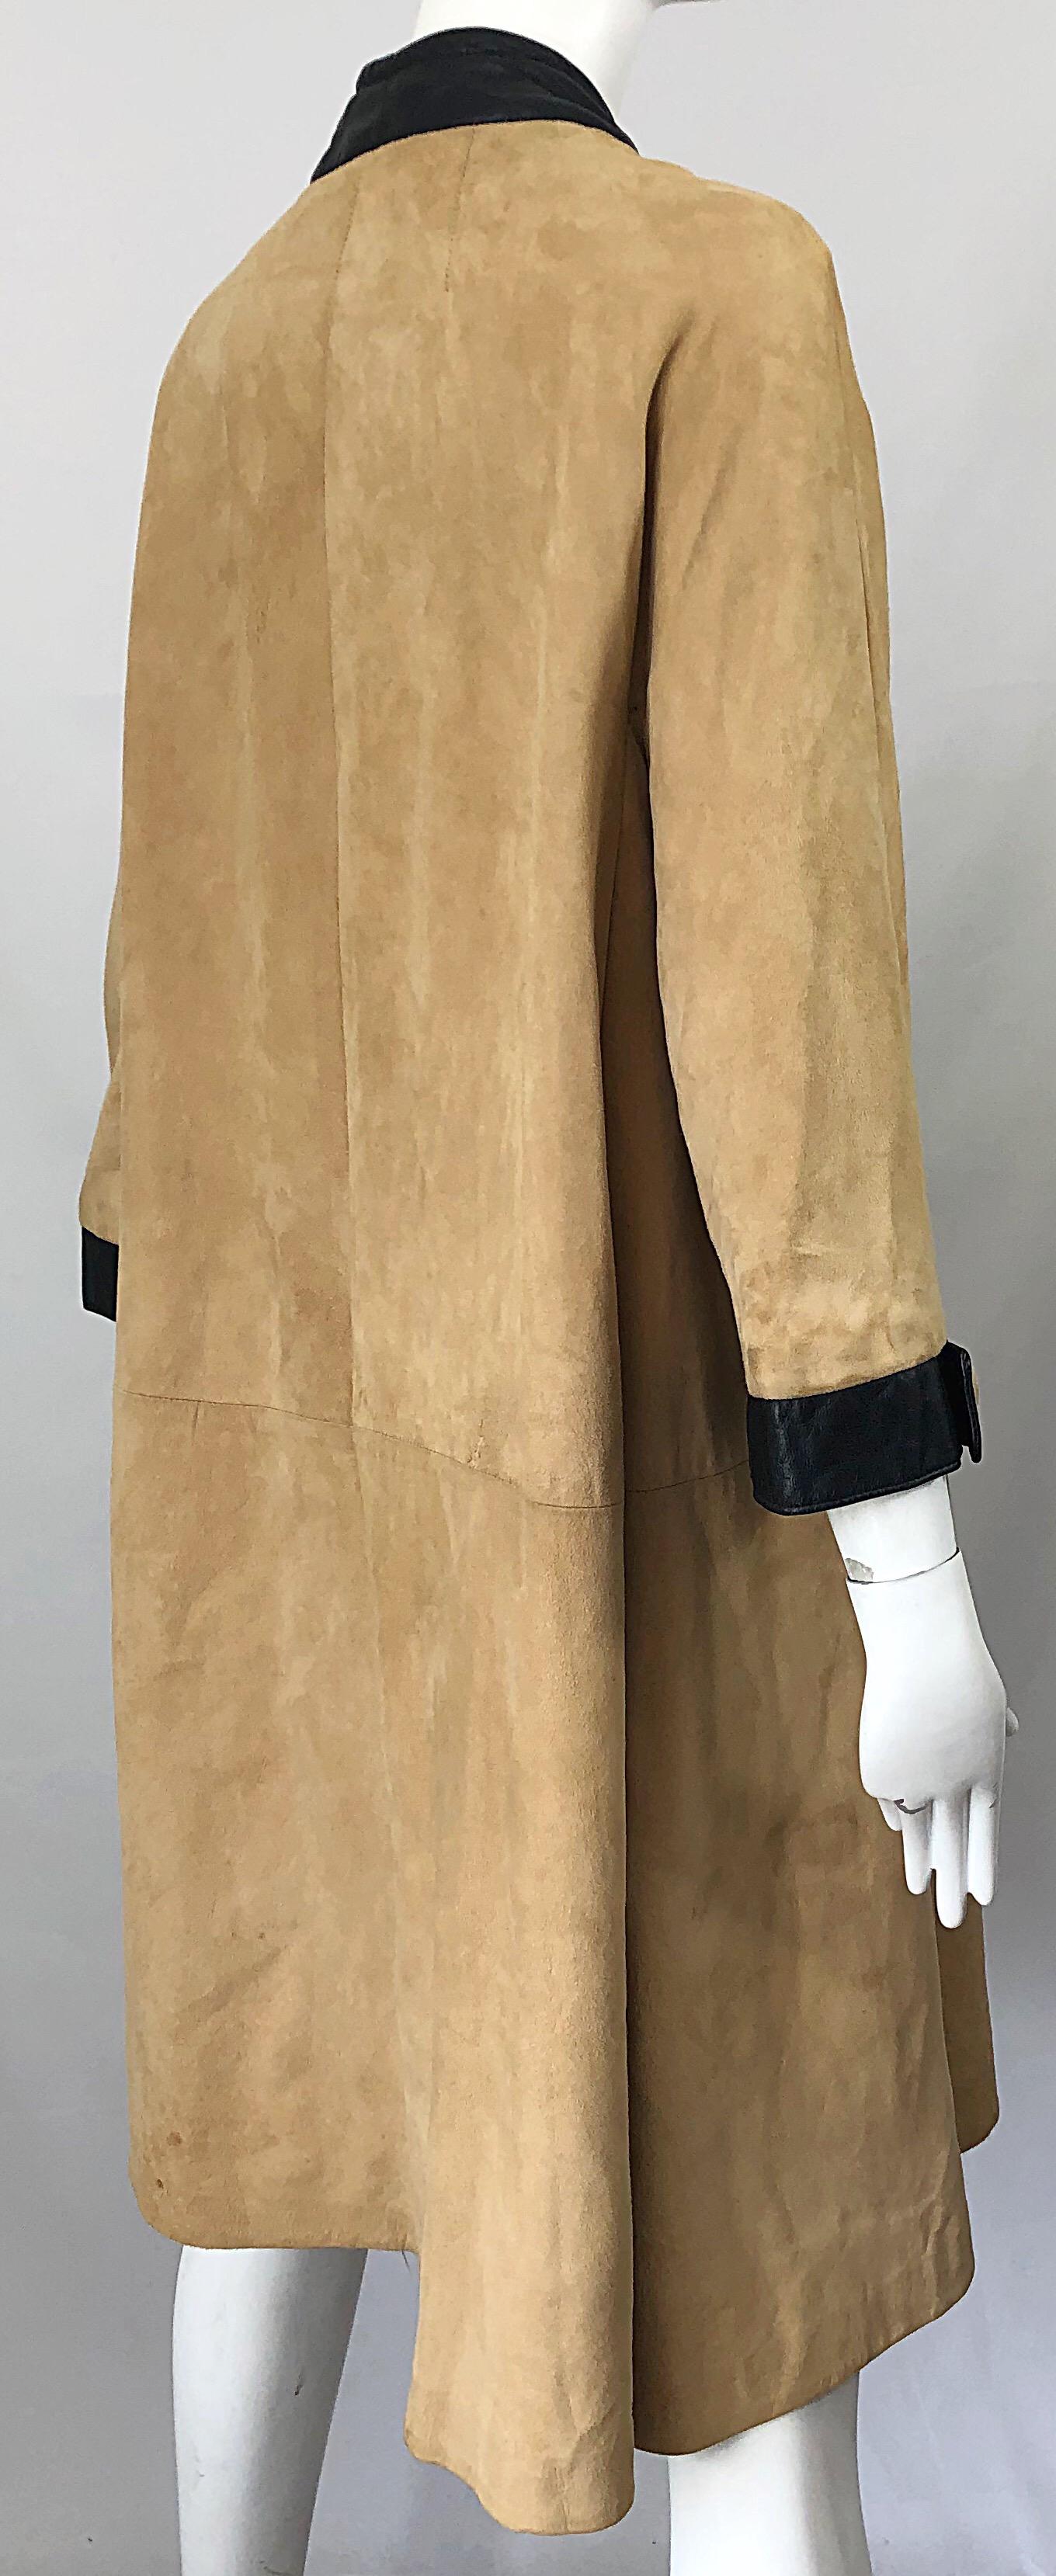 1960s Lillie Rubin Tan + Black Suede and Leather Vintage 60s Swing Jacket Coat 2